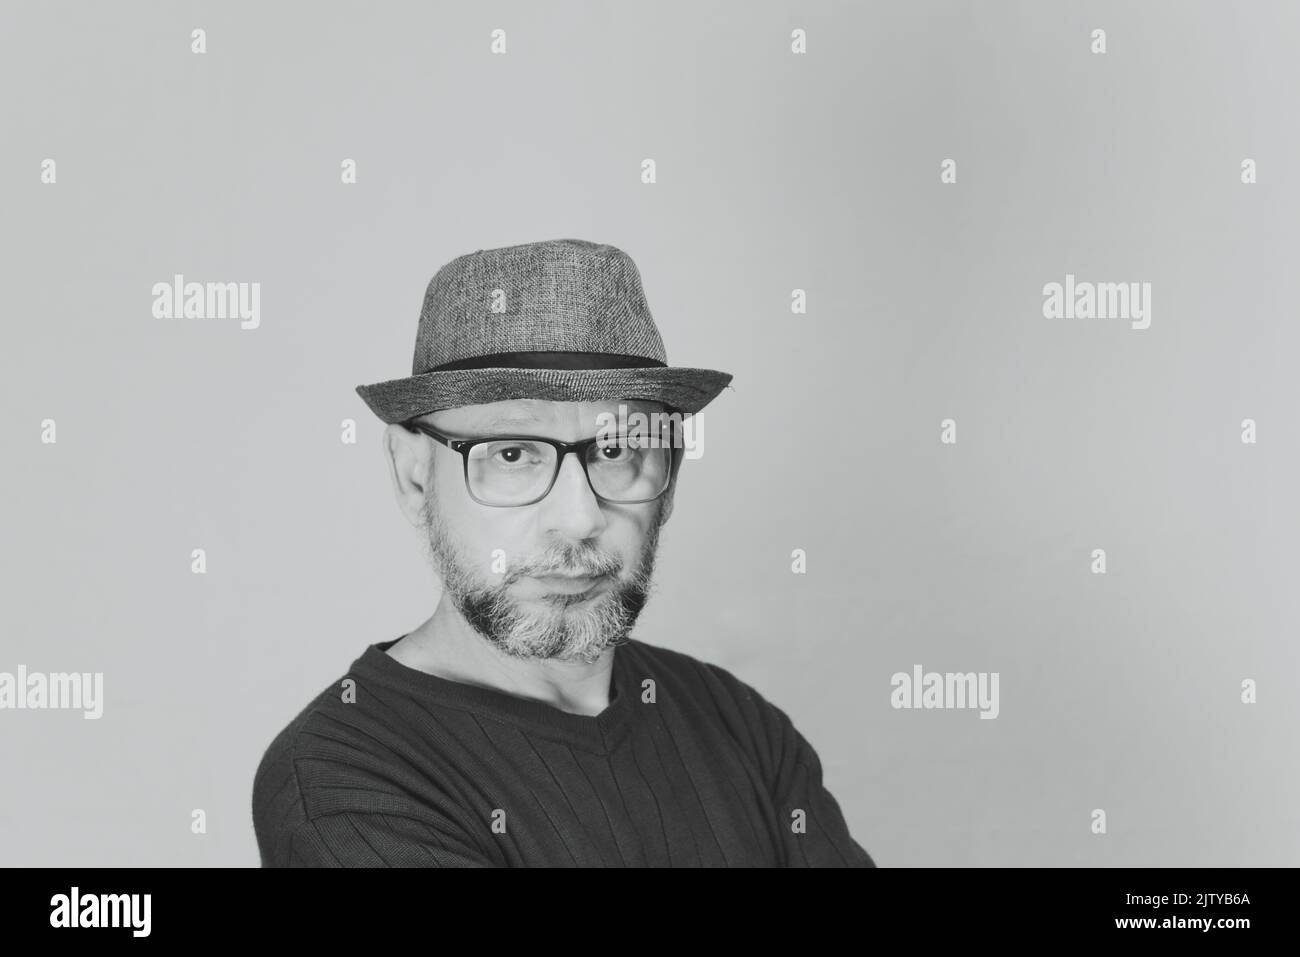 Black and white portrait of mature serious man. Wearing eyeglasses and a hat. Formal style. Stock Photo